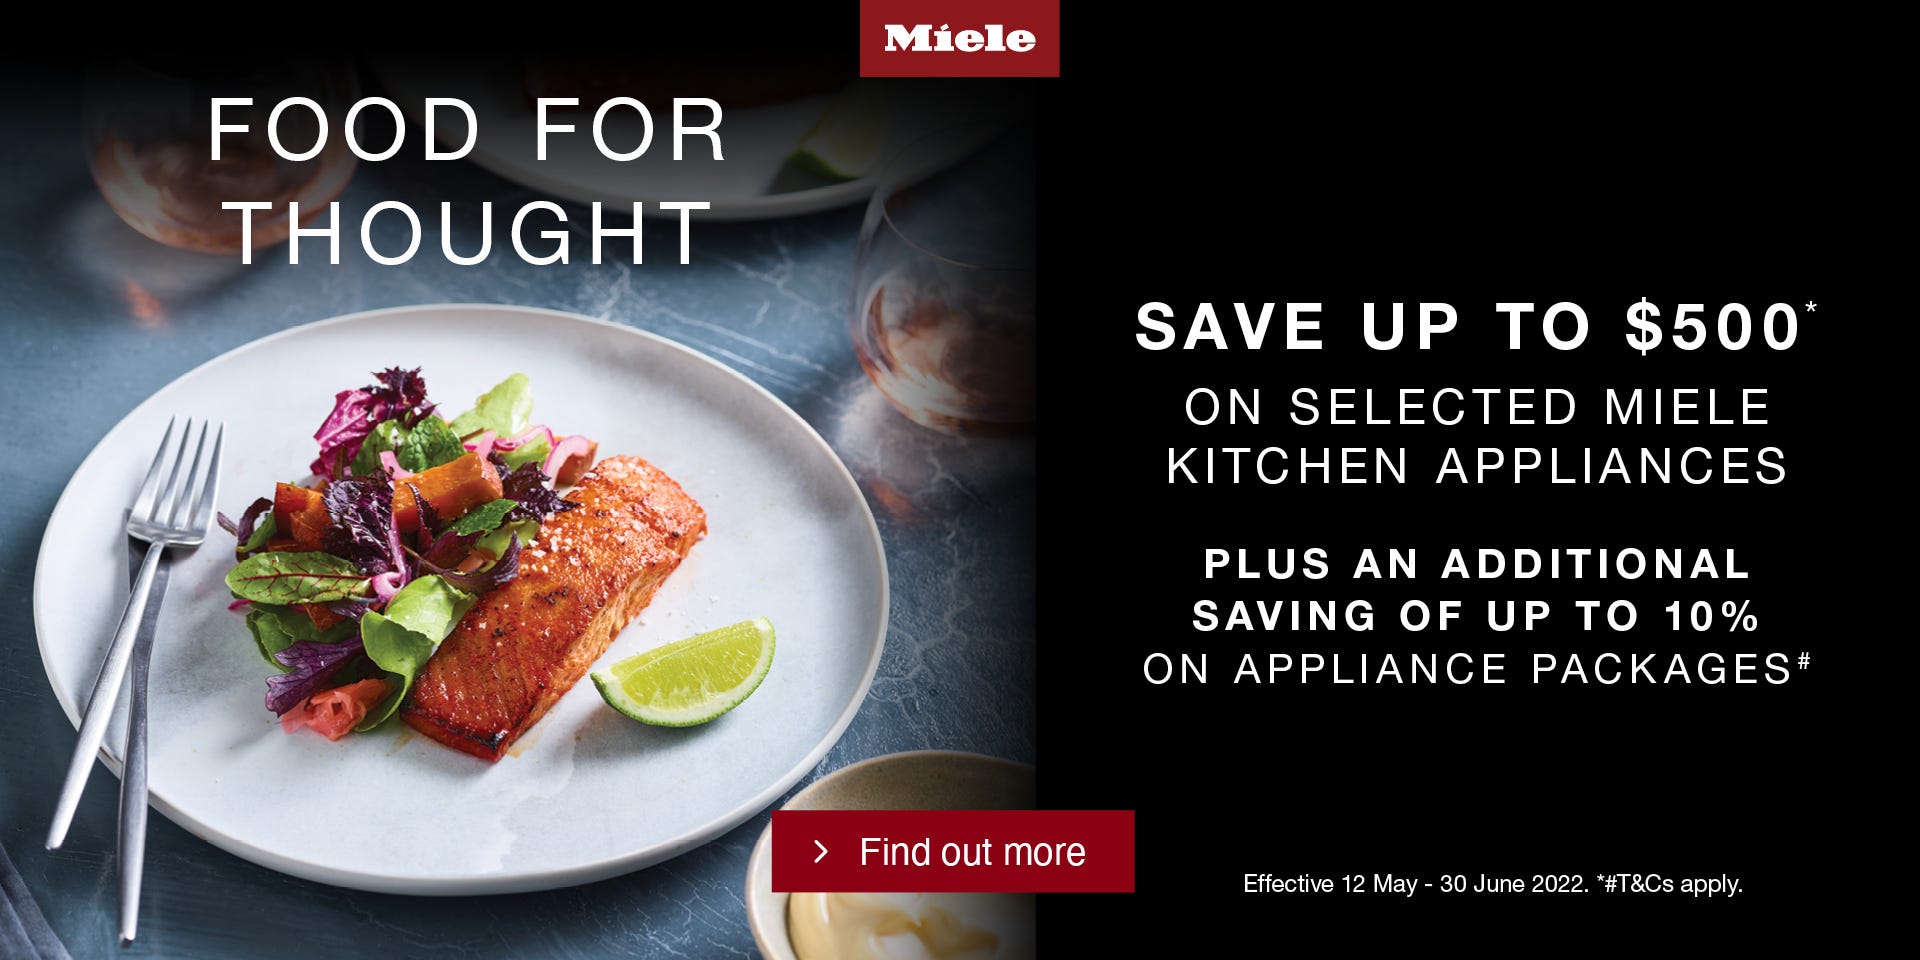 Save up to $500* on selected Miele ovens, cooktops & rangehoods at e&s. Offer ends 30/06/22. Find out more at an e&s near you today.